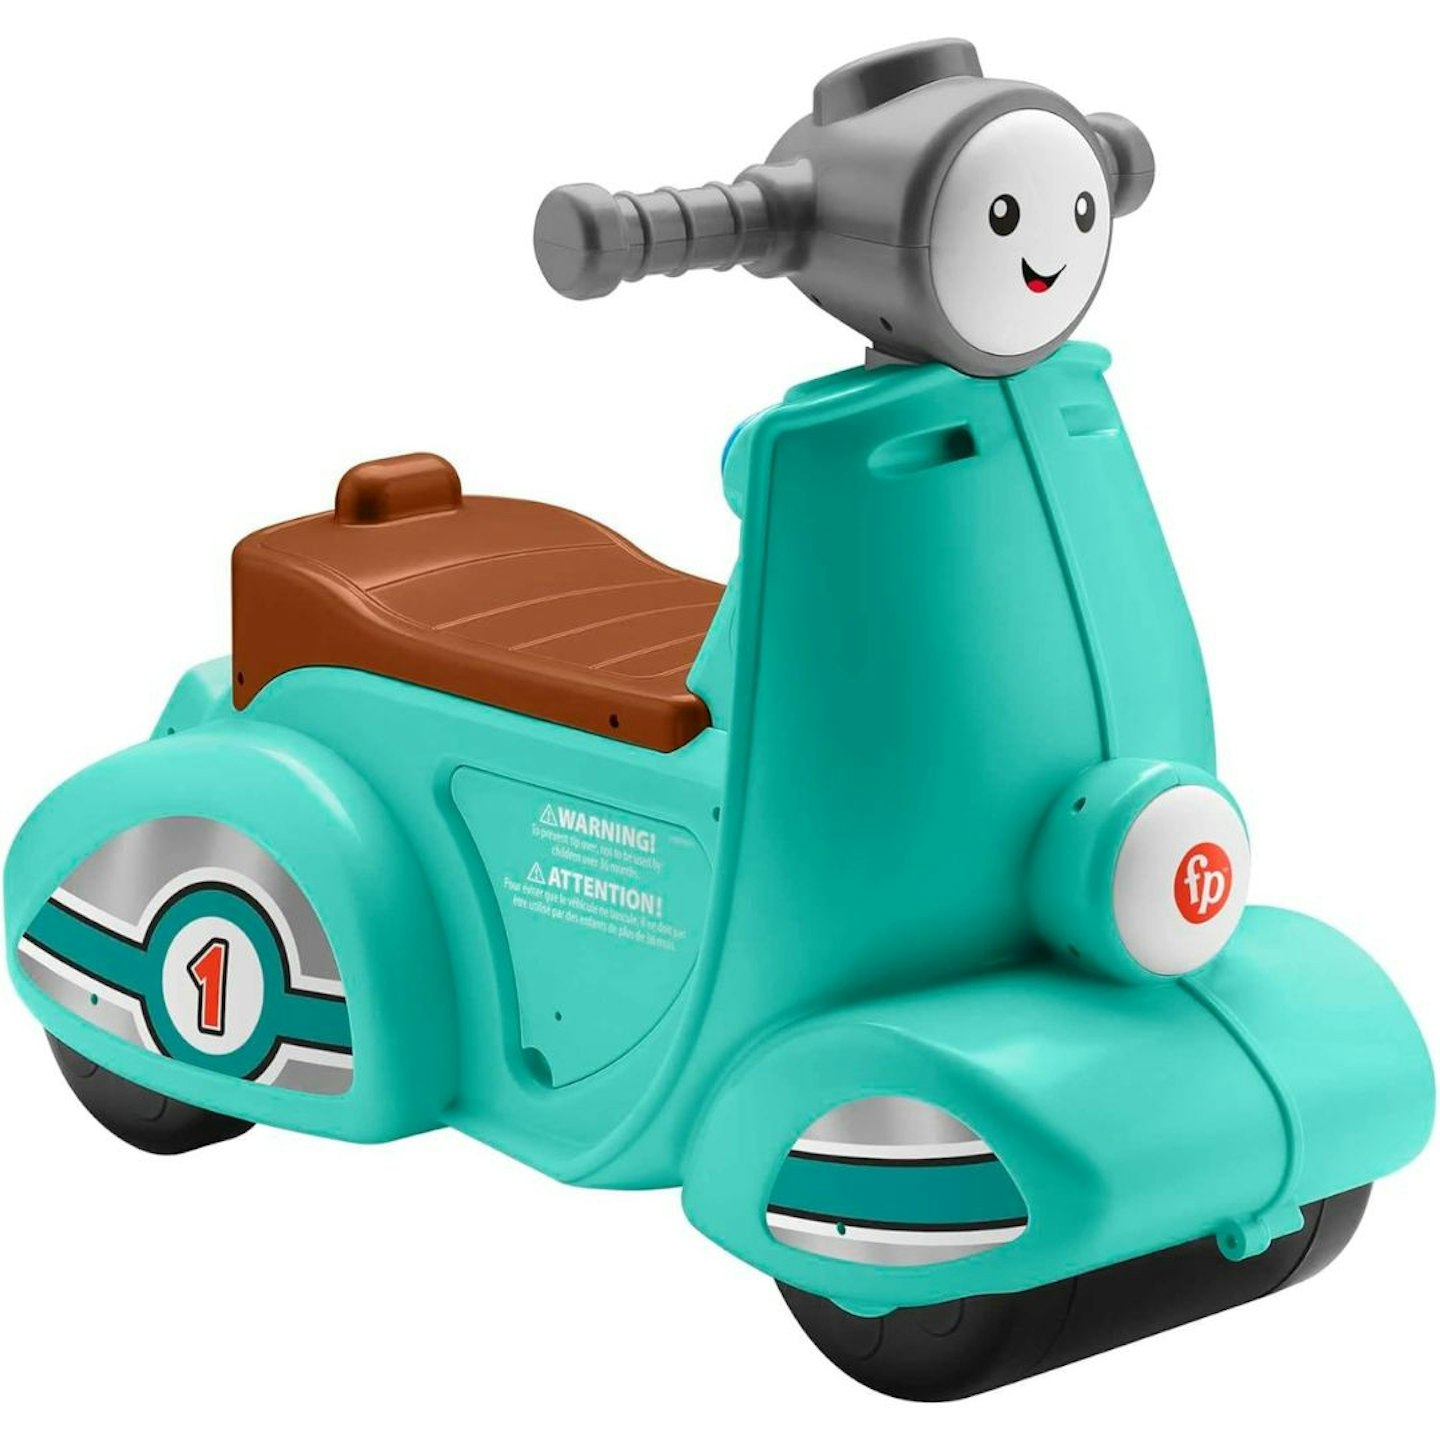  Fisher-Price Toddler Ride-On Toy Scooter